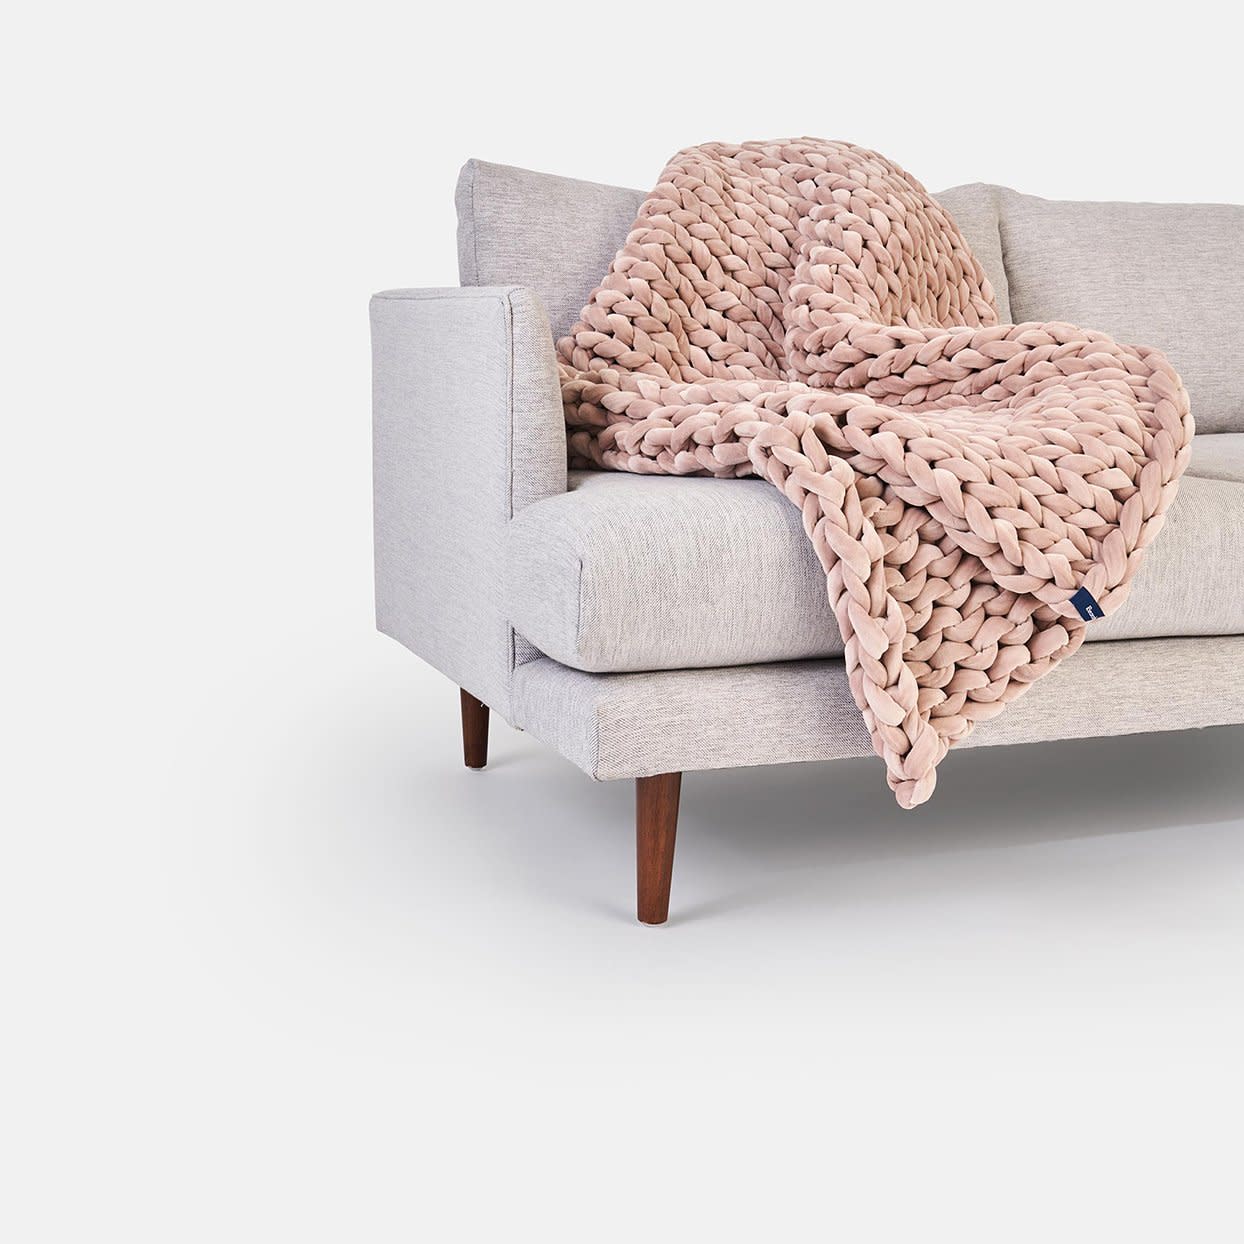 This Chunky-Knit Weighted Blanket from West Elm Is a Dream Come True